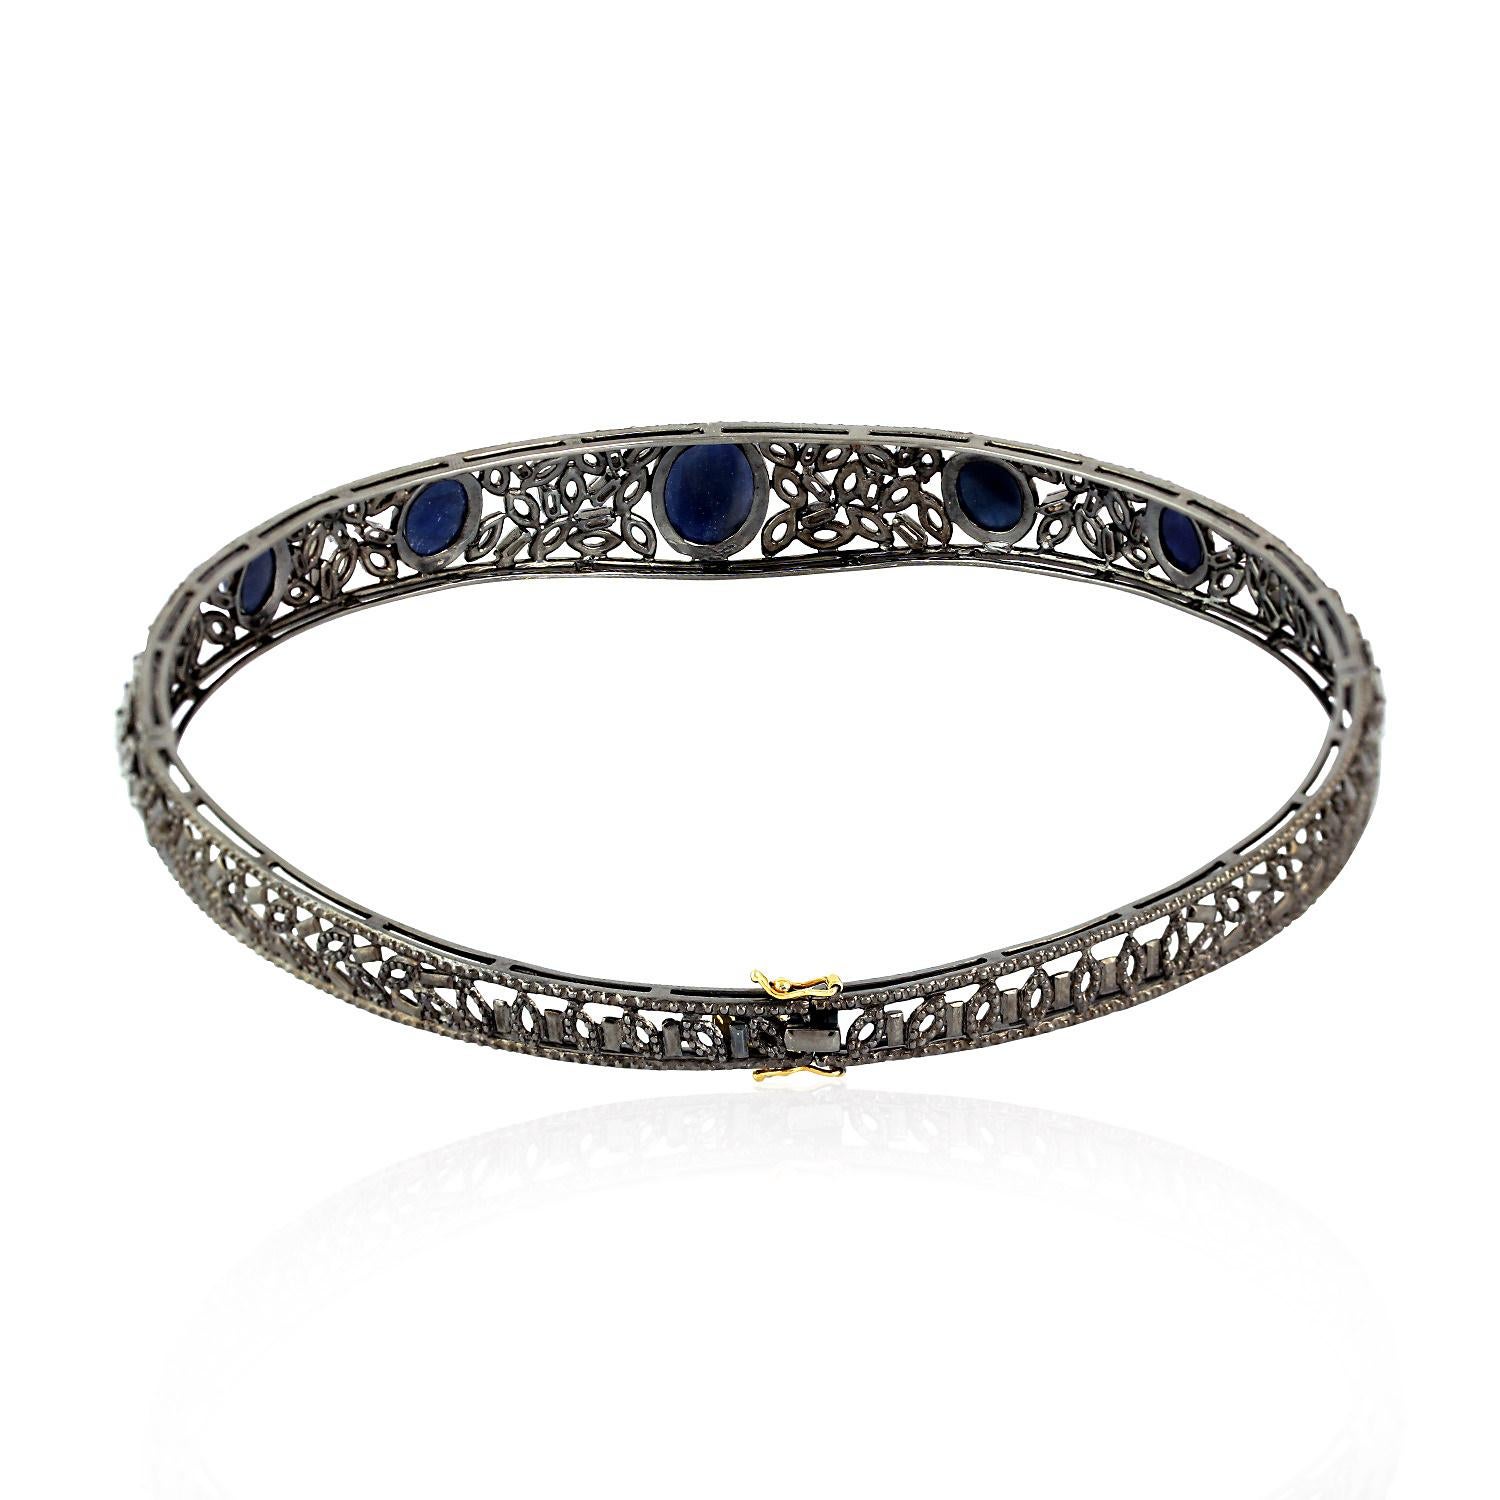 Contemporary Choker Necklace With Oval Shaped Sapphires & Pave Diamonds In 18k Gold & Silver For Sale